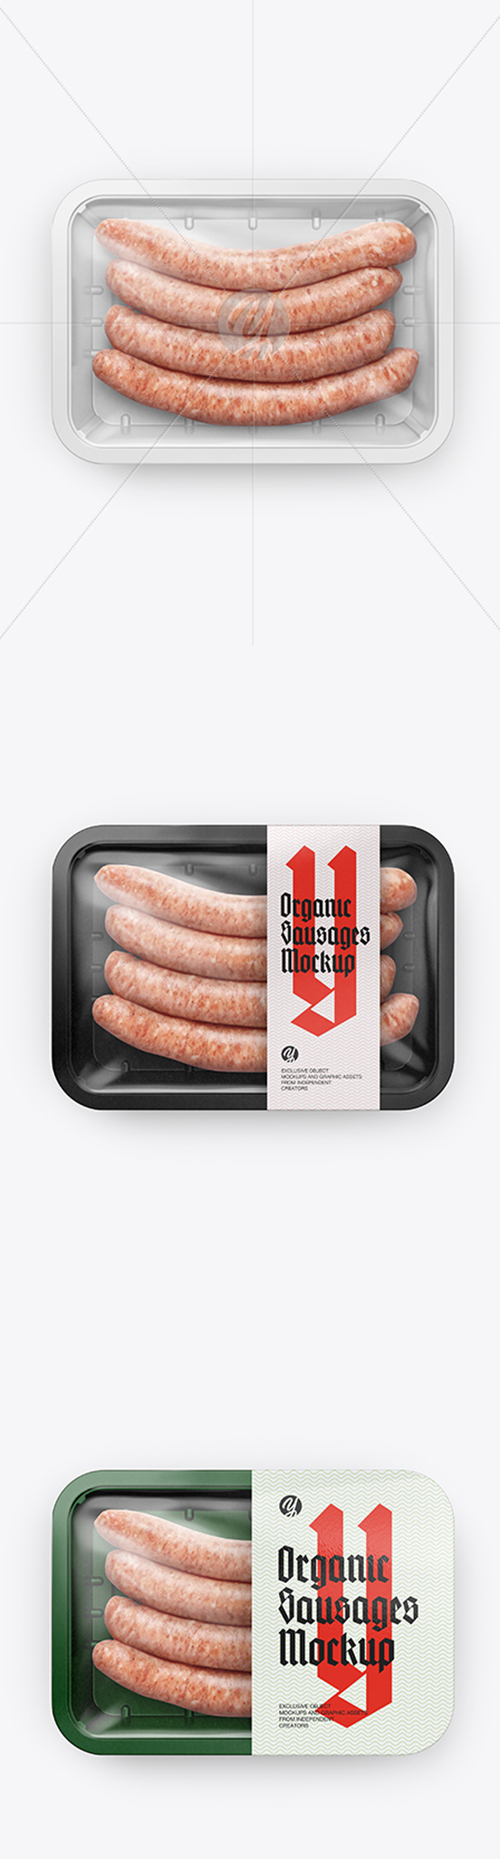 Plastic Tray With Sausages Mockup 38566 TIF